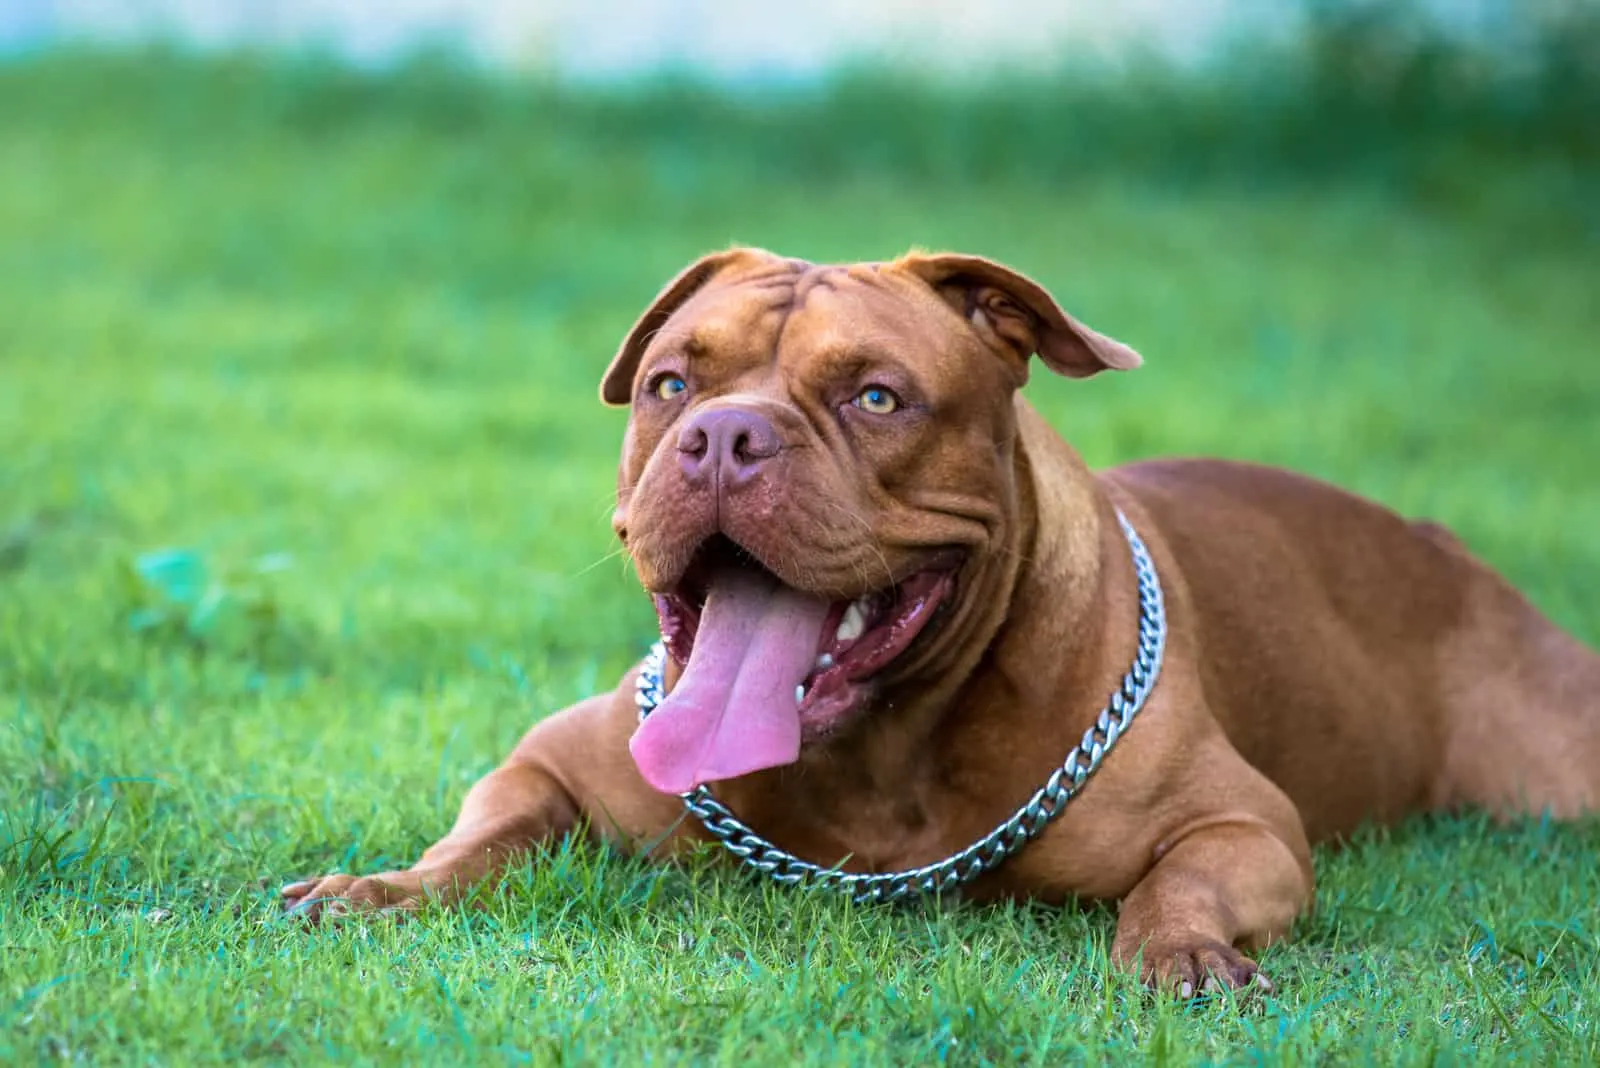 The American Bully rests on a green surface